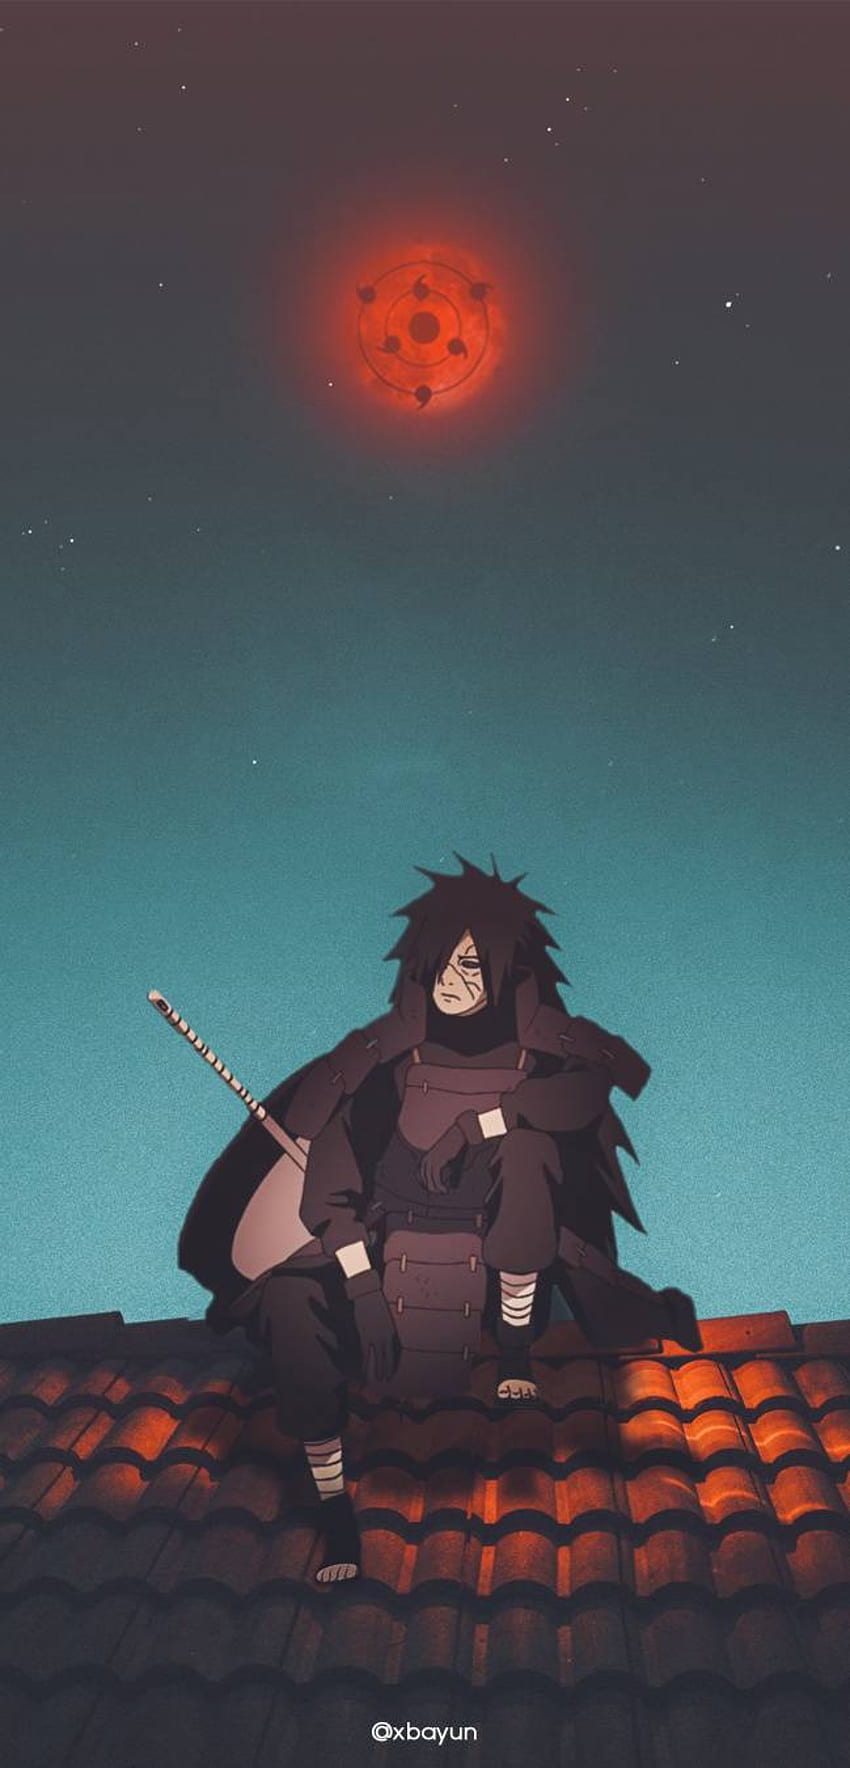 smiren - Wake up to reality. nothing ever goes as planned in this accursed world. - MADARA UCHIHA HD phone wallpaper